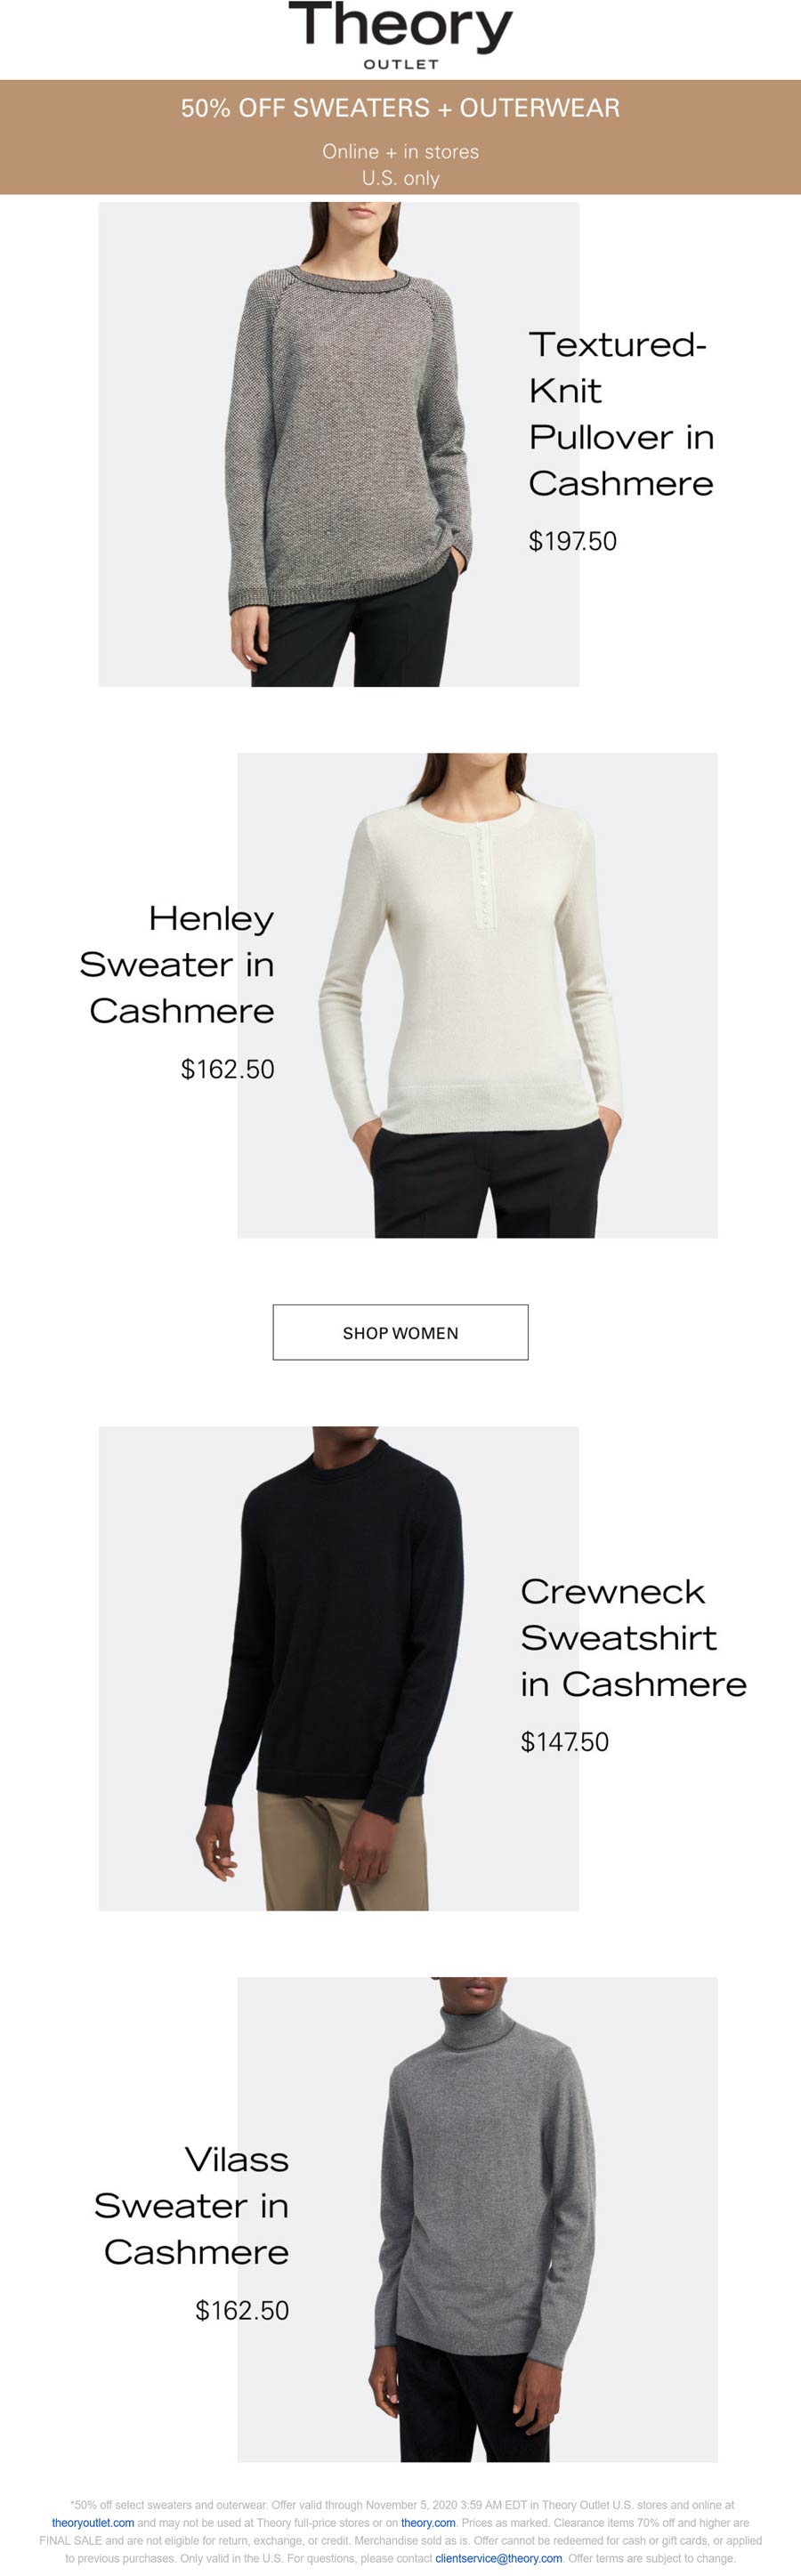 Theory Outlet stores Coupon  50% off sweaters & outerwear at Theory Outlet, ditto online #theoryoutlet 